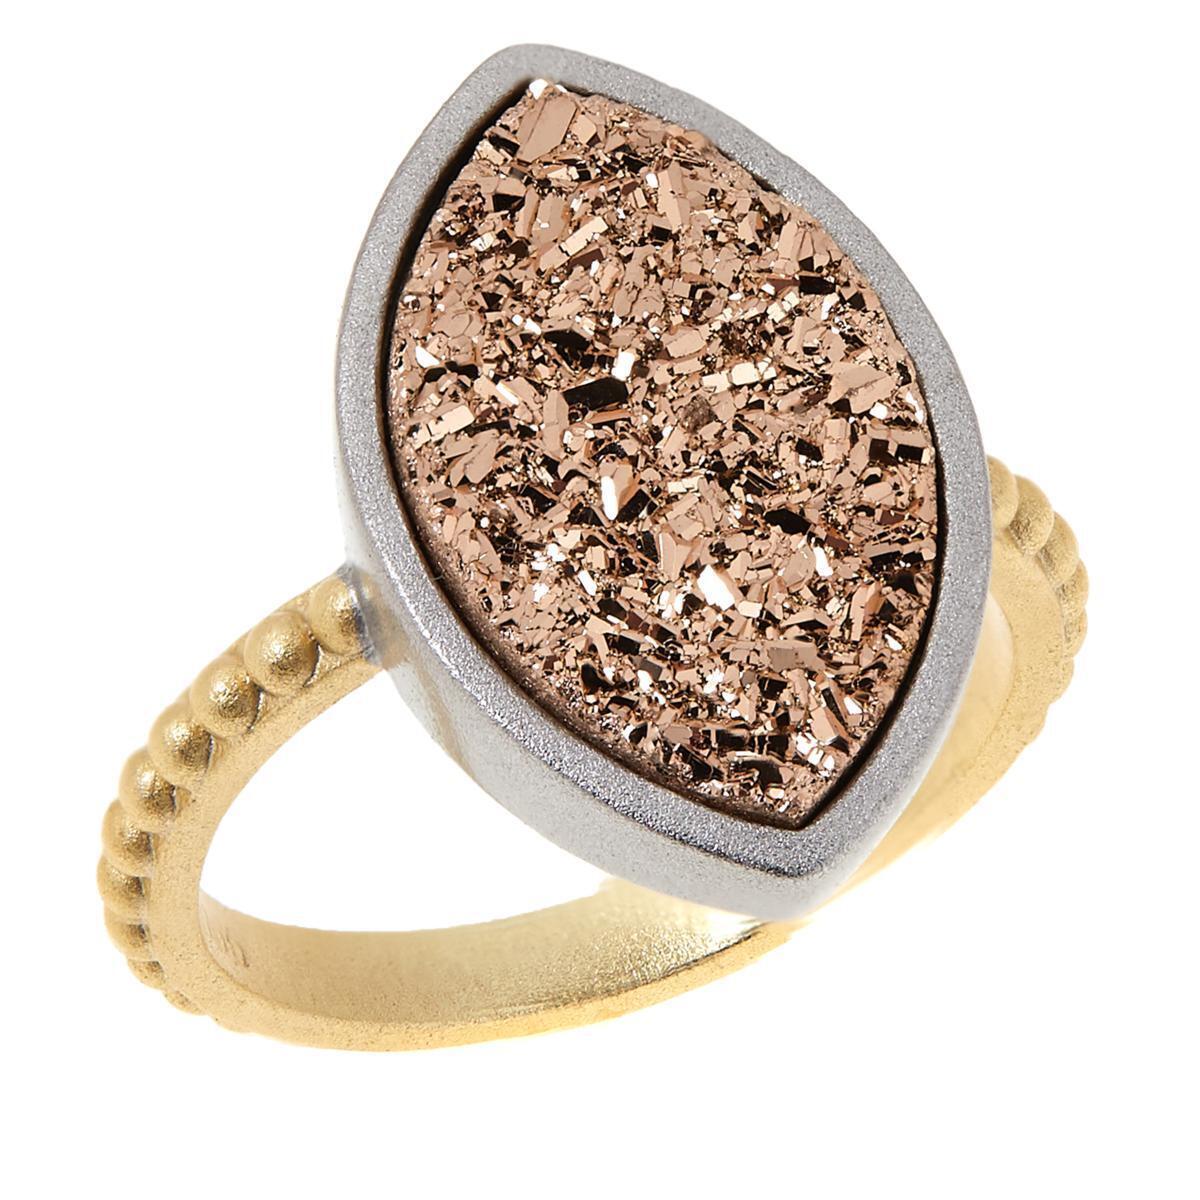 Natalie Wood Designs "She's a Gem" Two-tone Drusy Ring. Size 6